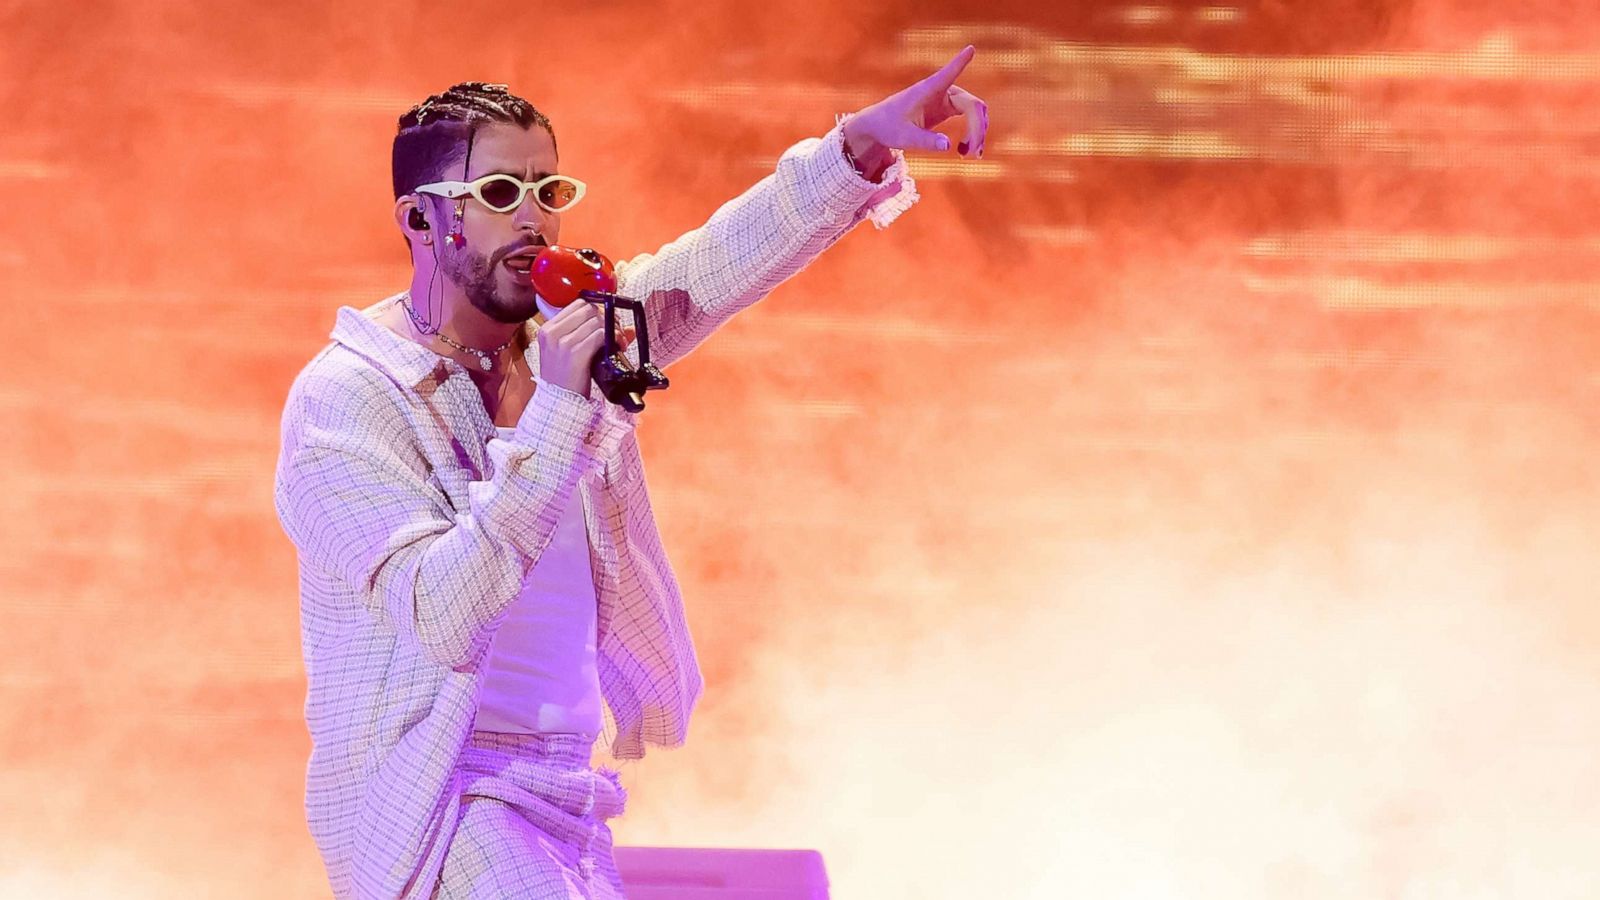 PHOTO: In this Aug. 12, 2022, file photo, Bad Bunny performs on stage during his World's Hottest Tour at Hard Rock Stadium in Miami Gardens, Fla.